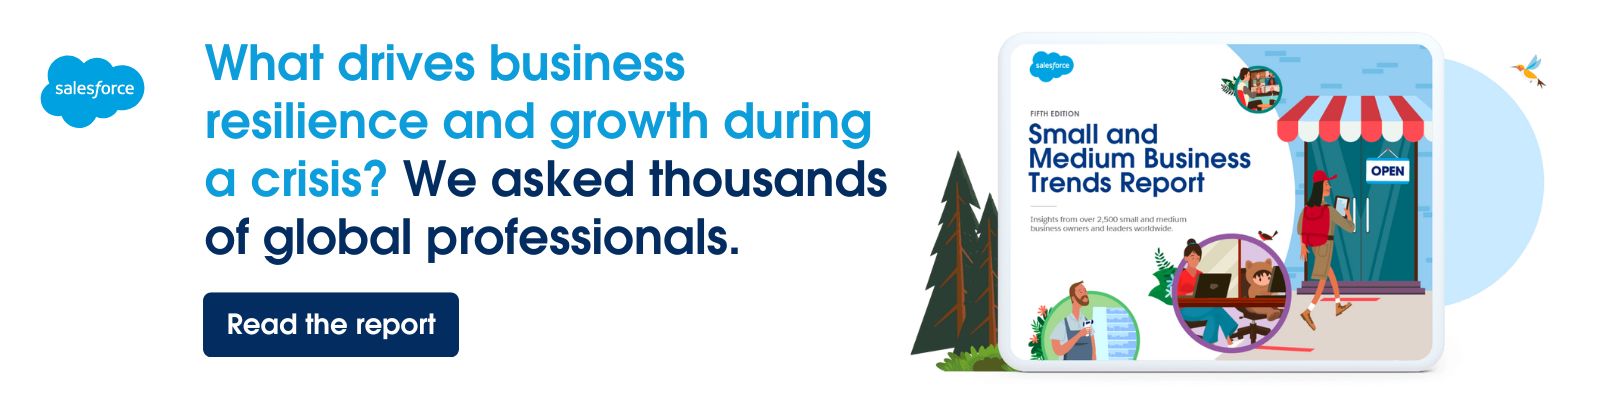 Download the Small and Medium Business Trends report.